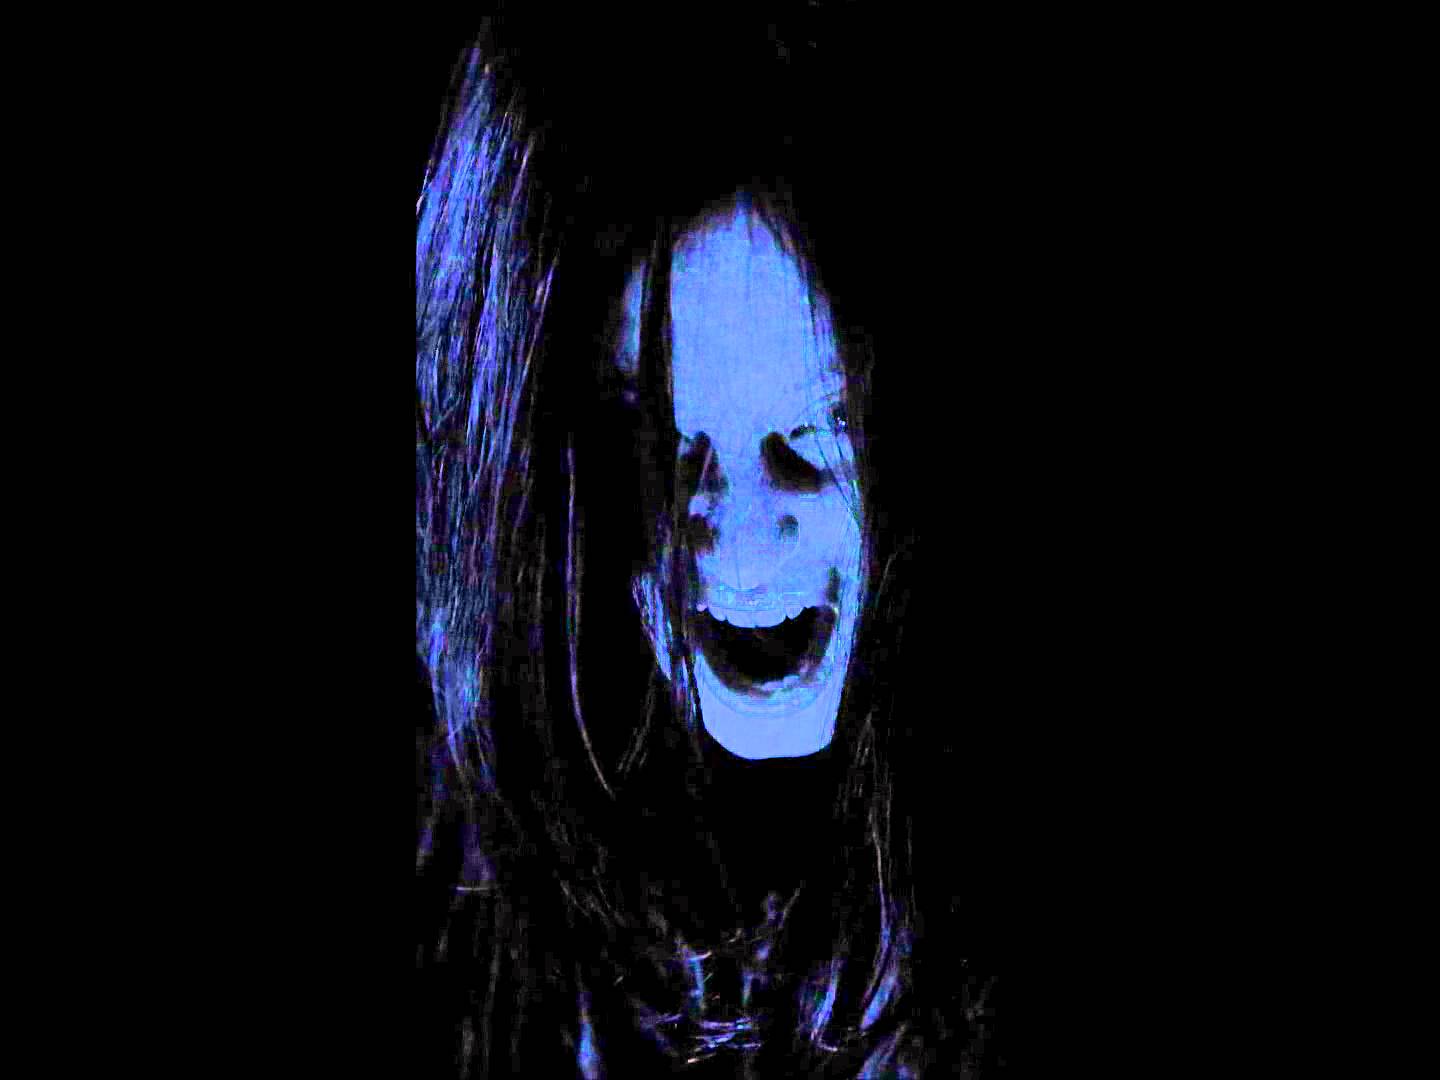 Scary Halloween Live Wallpaper   Live Wallpaper Scary Face 1440x1080